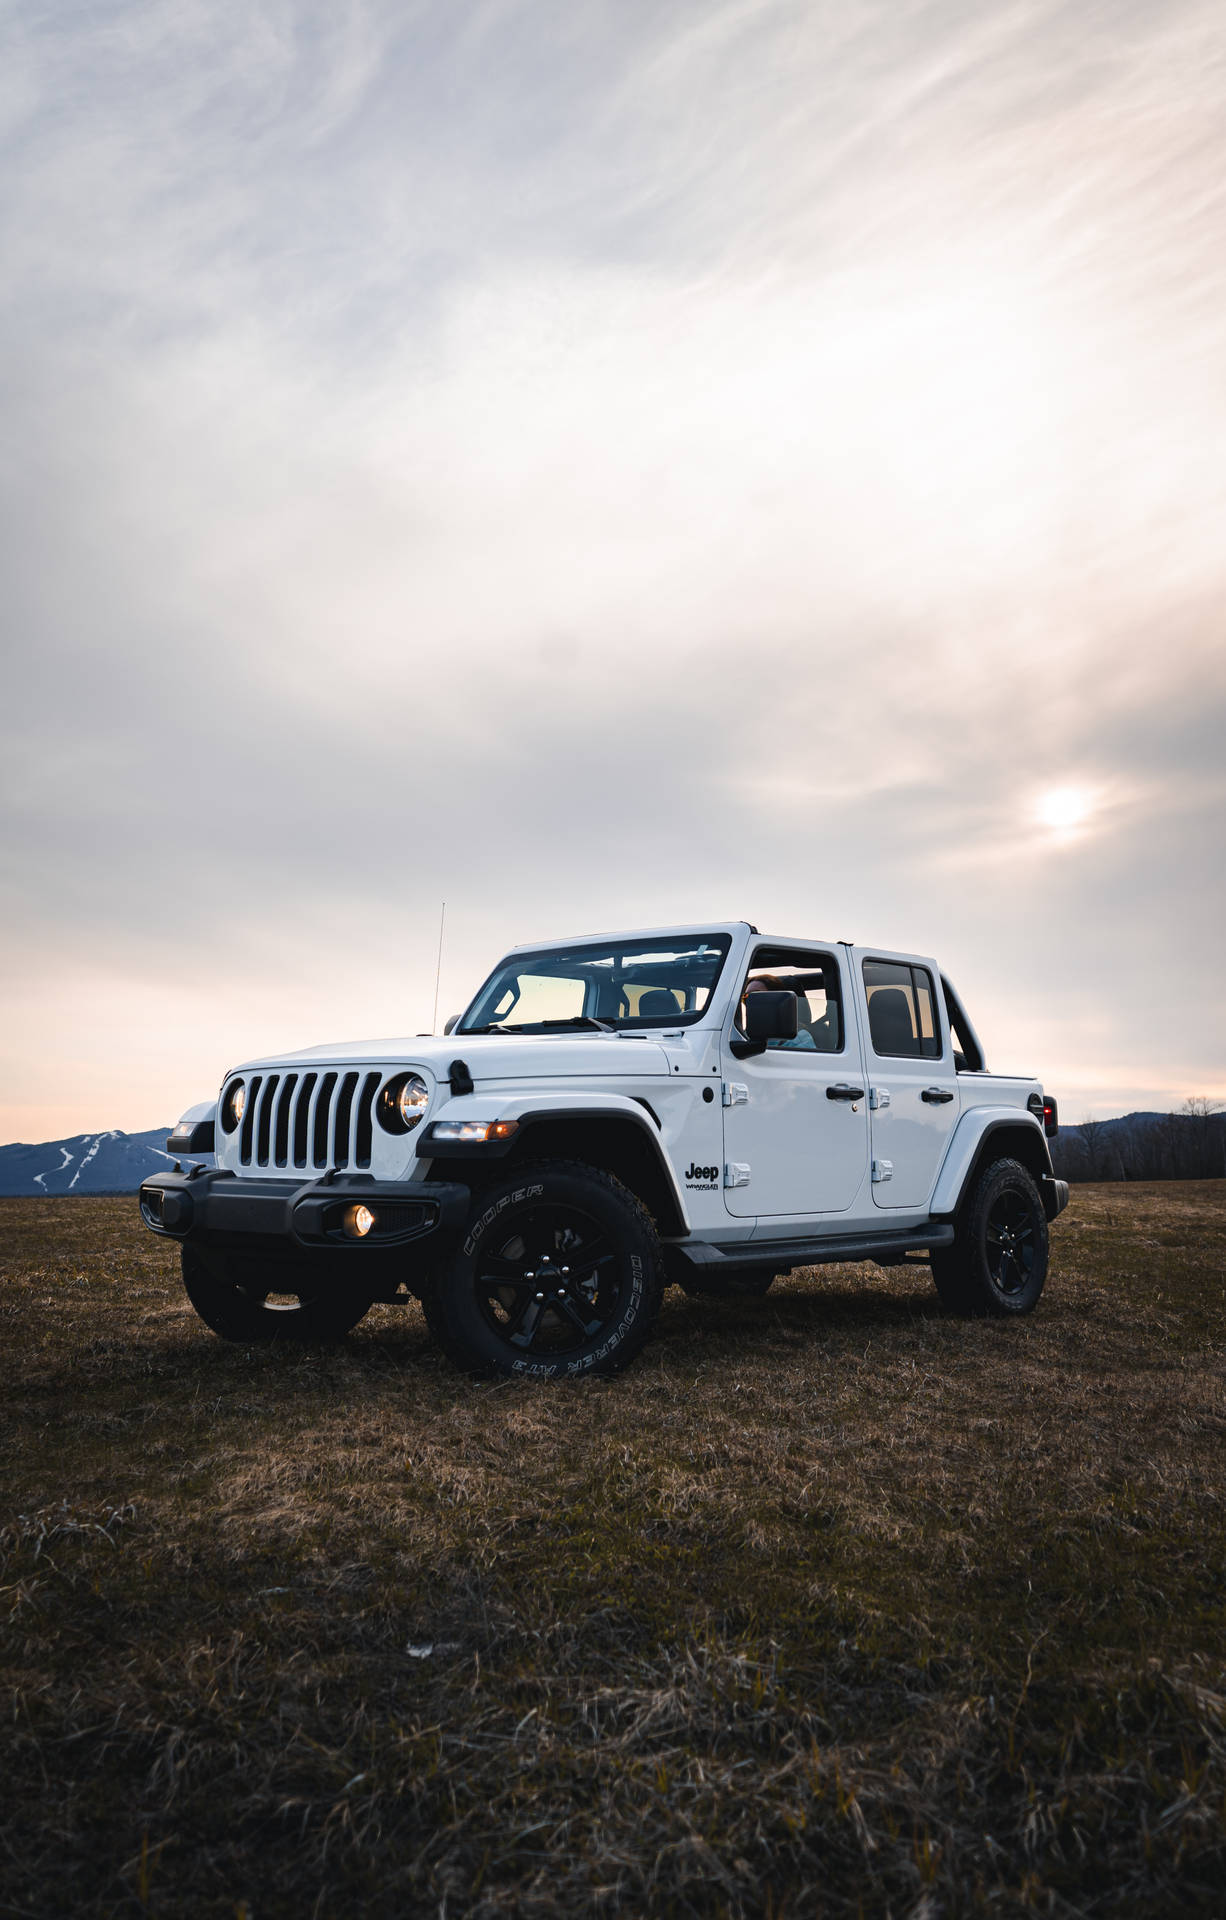 Top 999+ Jeep Wallpaper Full HD, 4K✅Free to Use